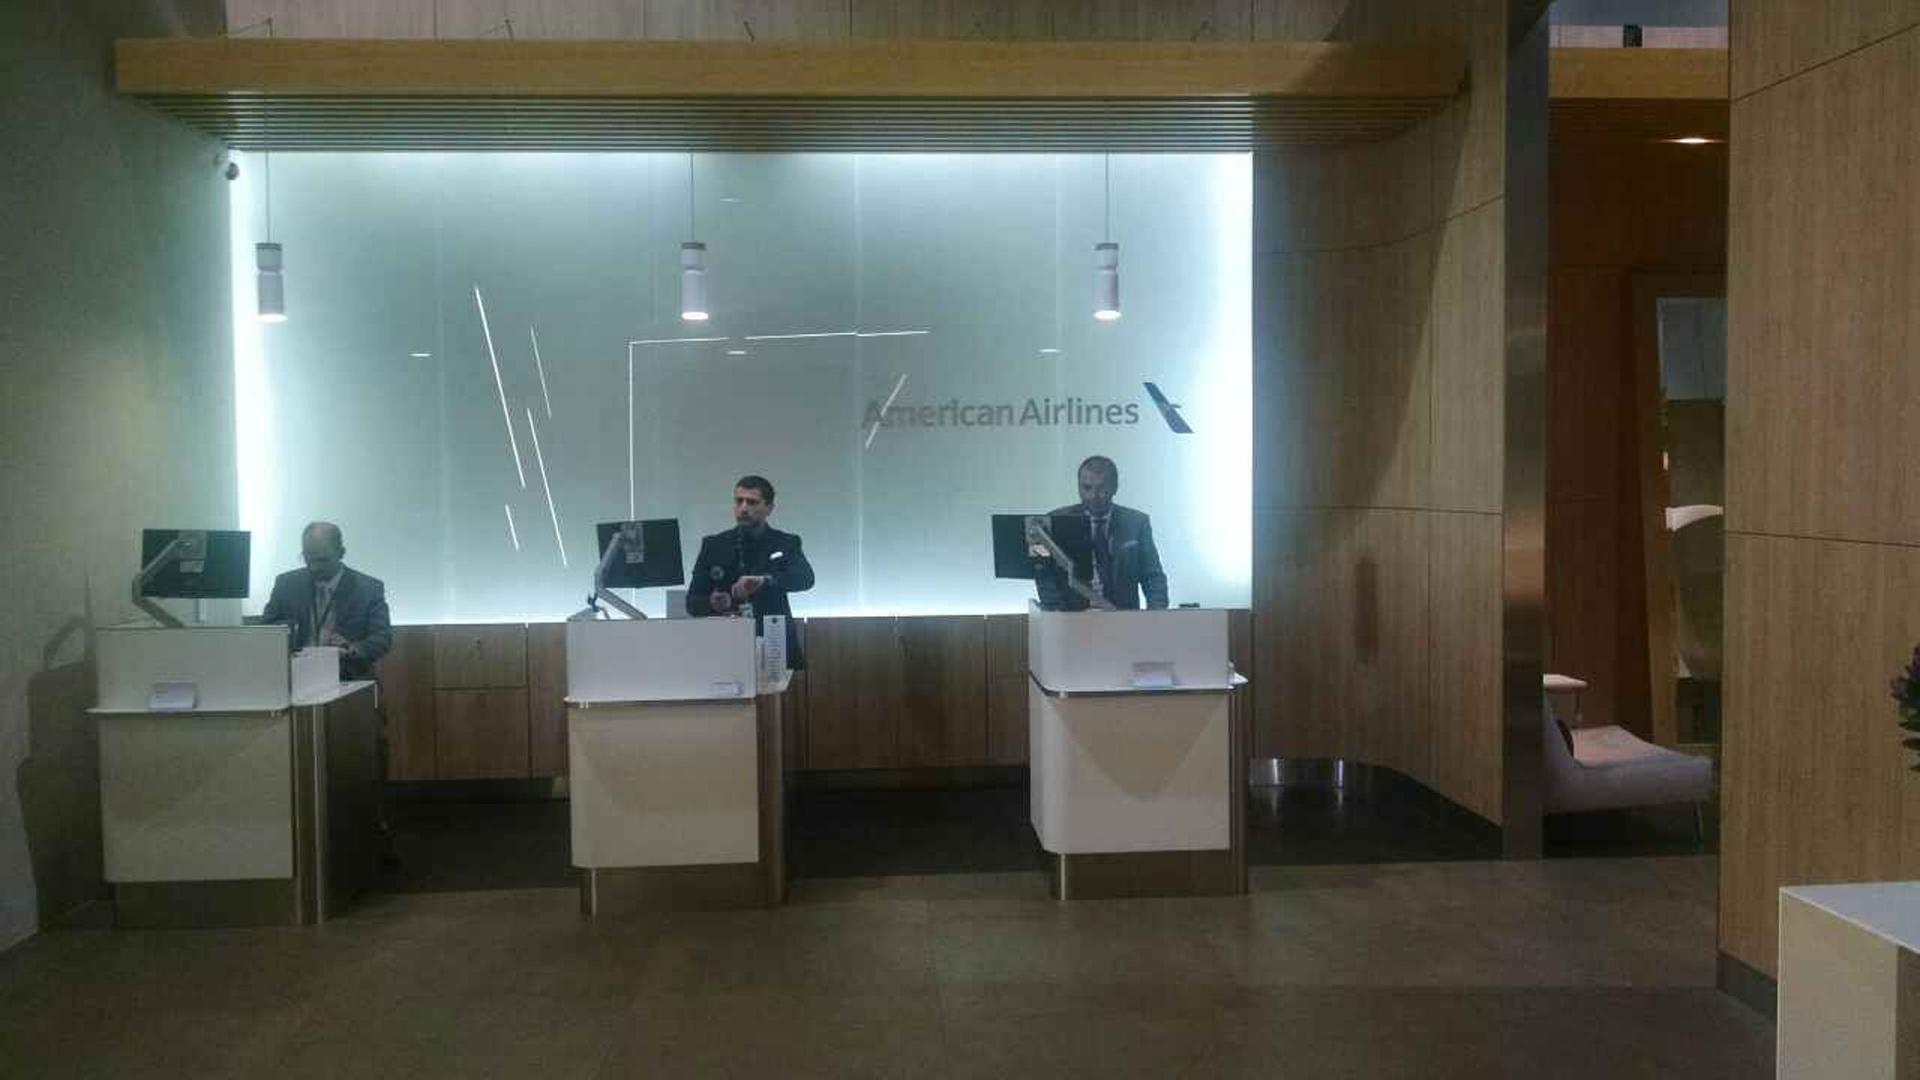 American Airlines Admirals Club image 10 of 30